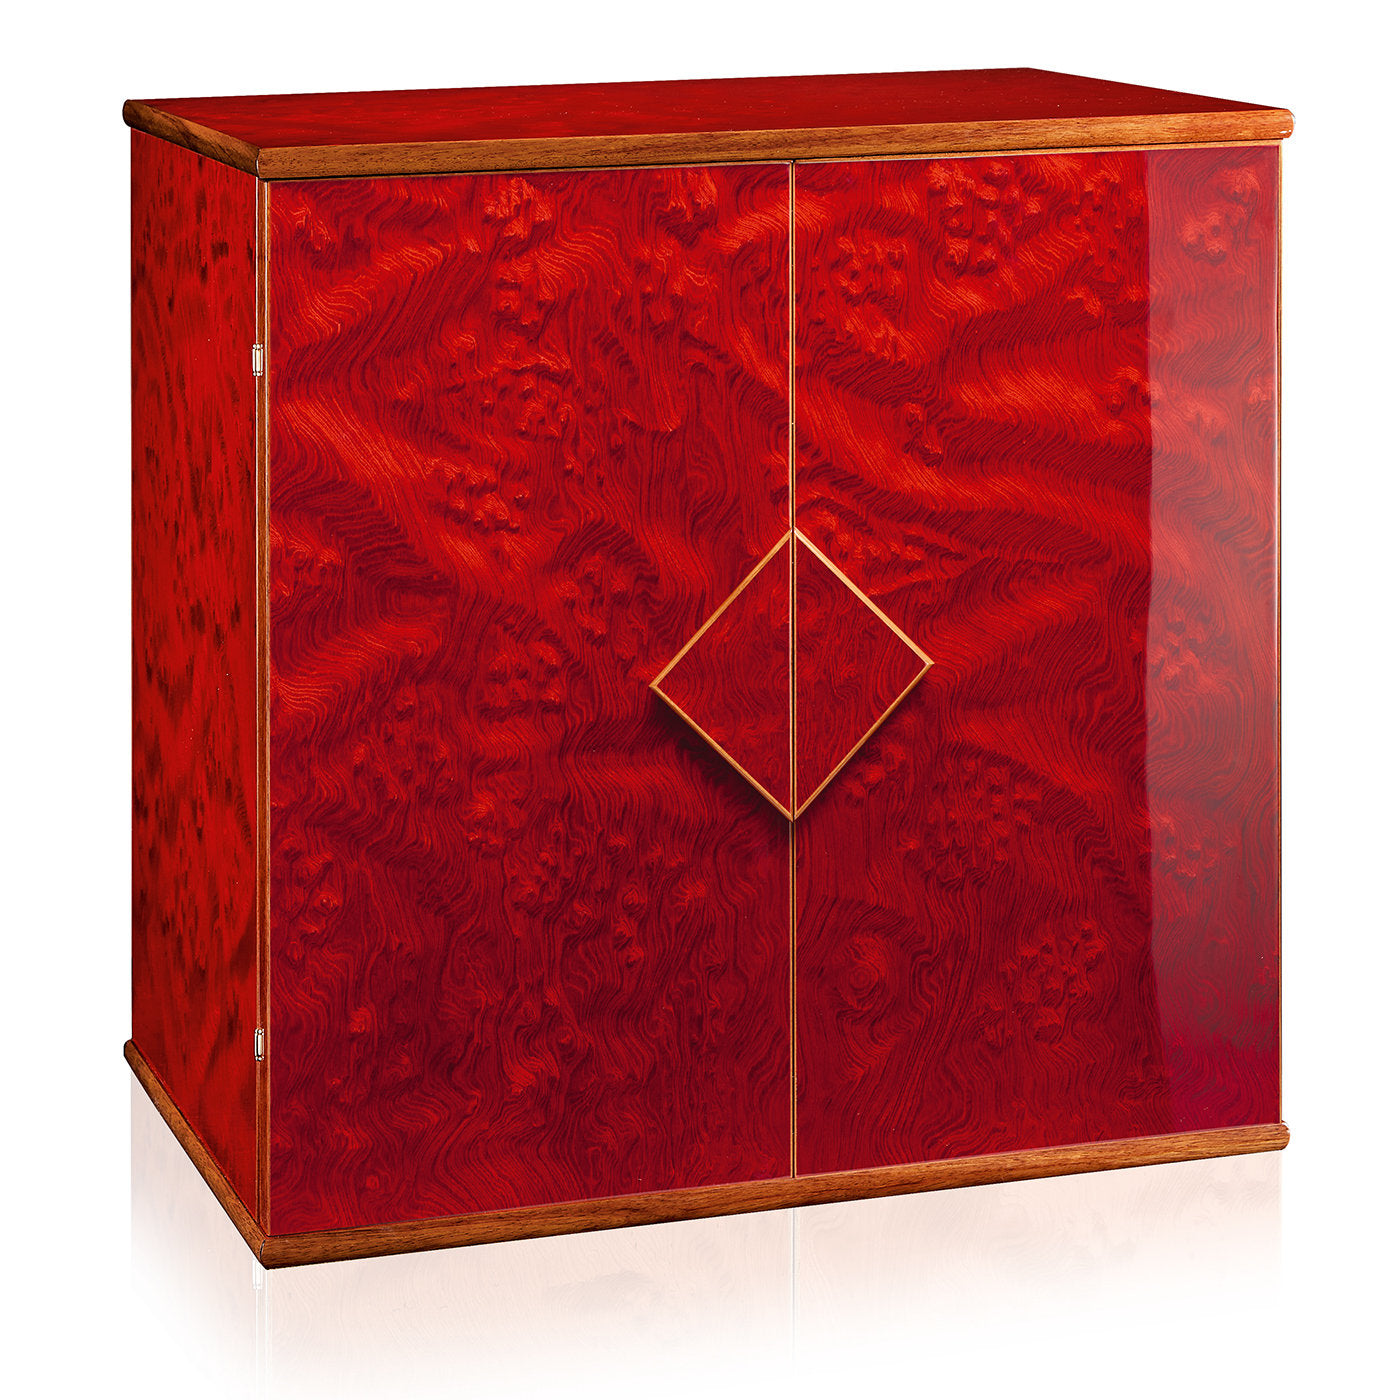 Forziere Red Armored Jewelry Chest - Alternative view 3